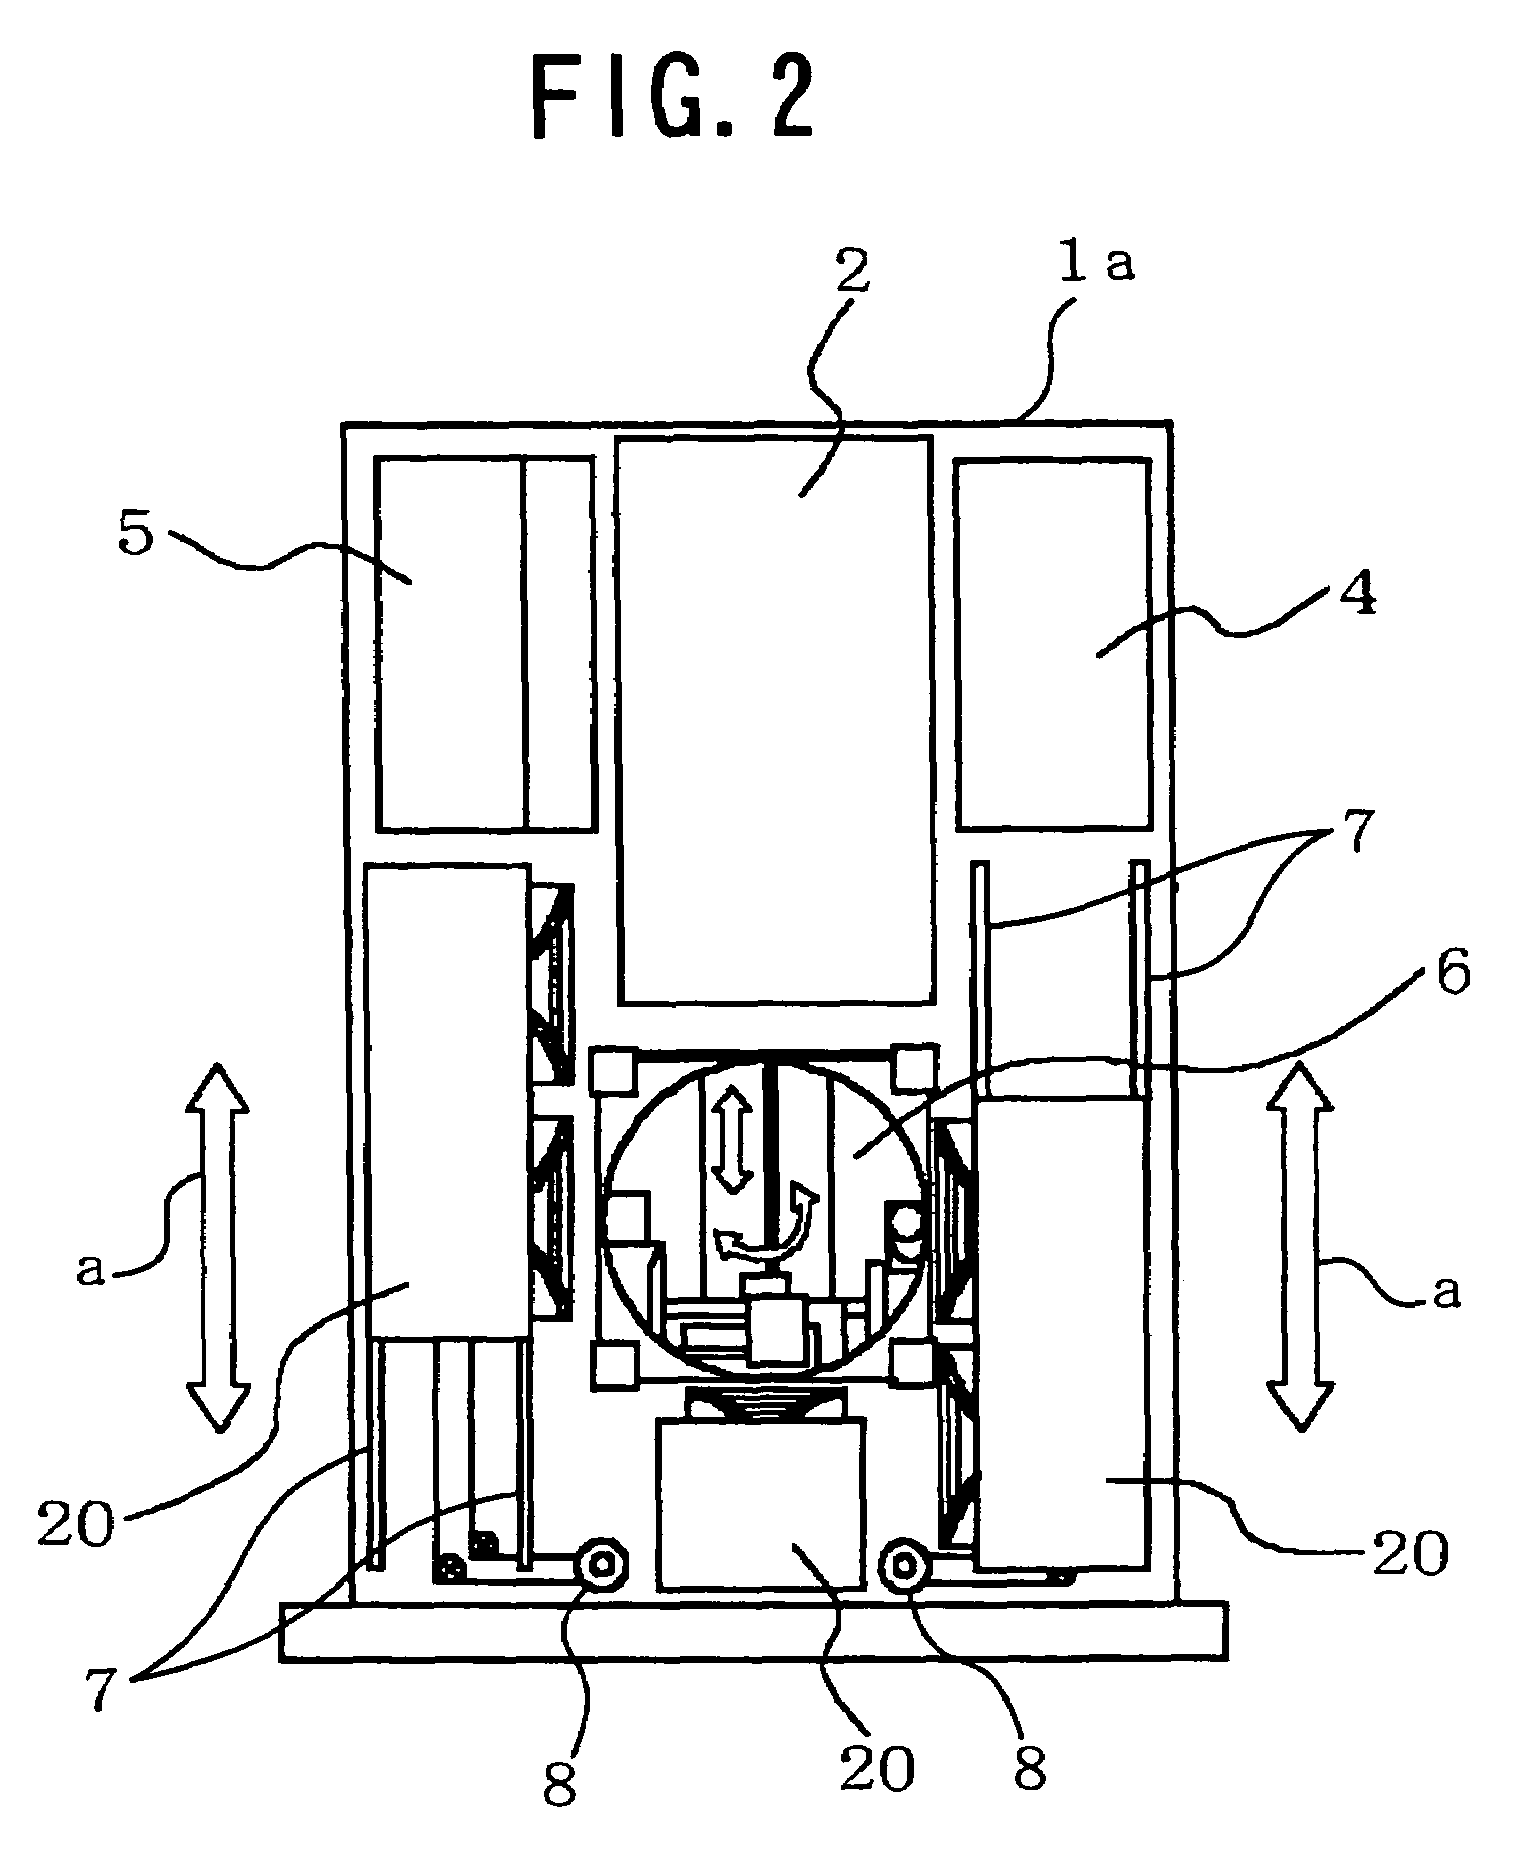 Magnetic tape cartridge library apparatus having vertically oriented stages